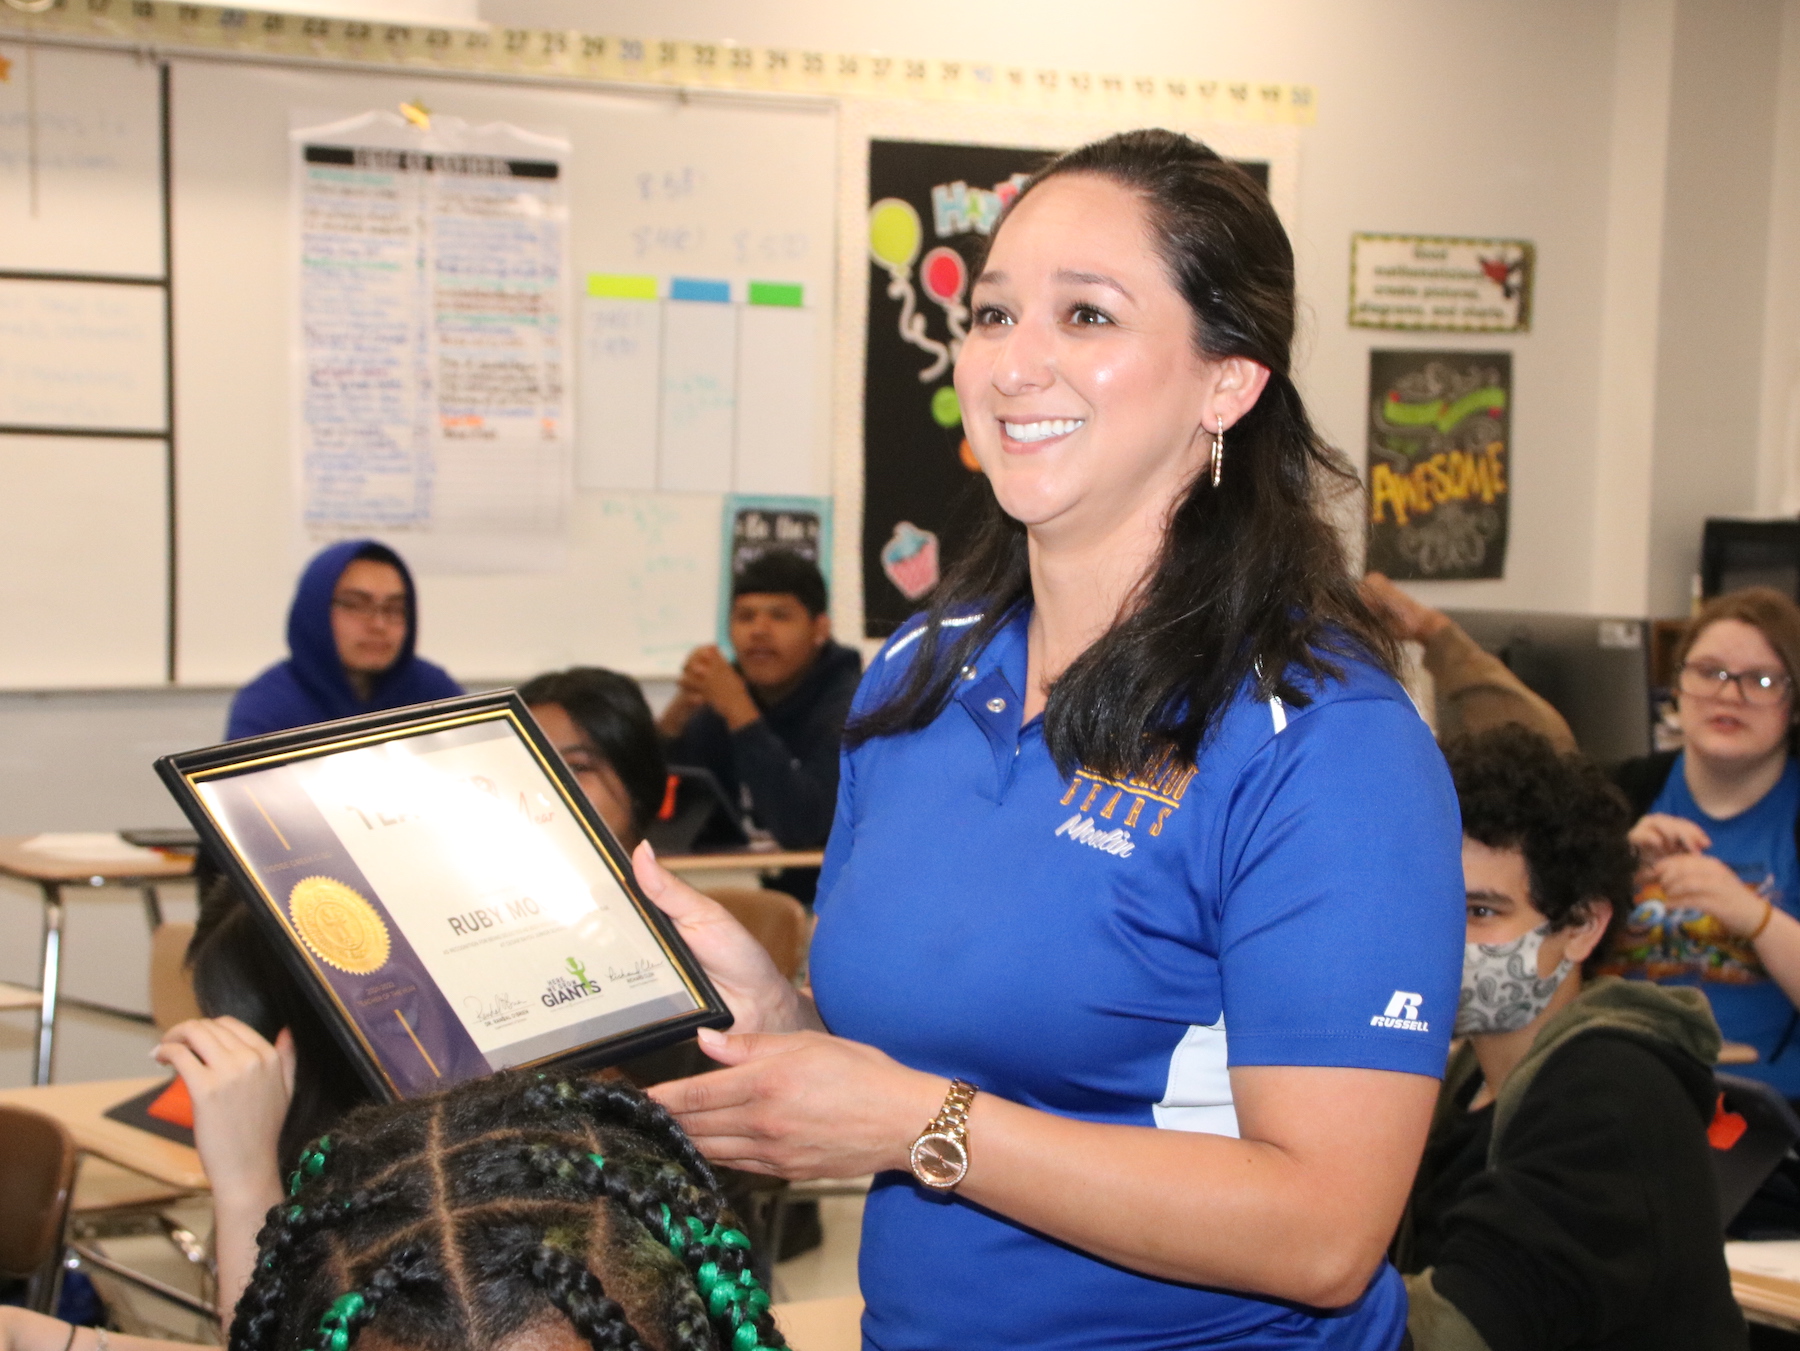 Teacher in classroom smiling with excitement while holding plaque